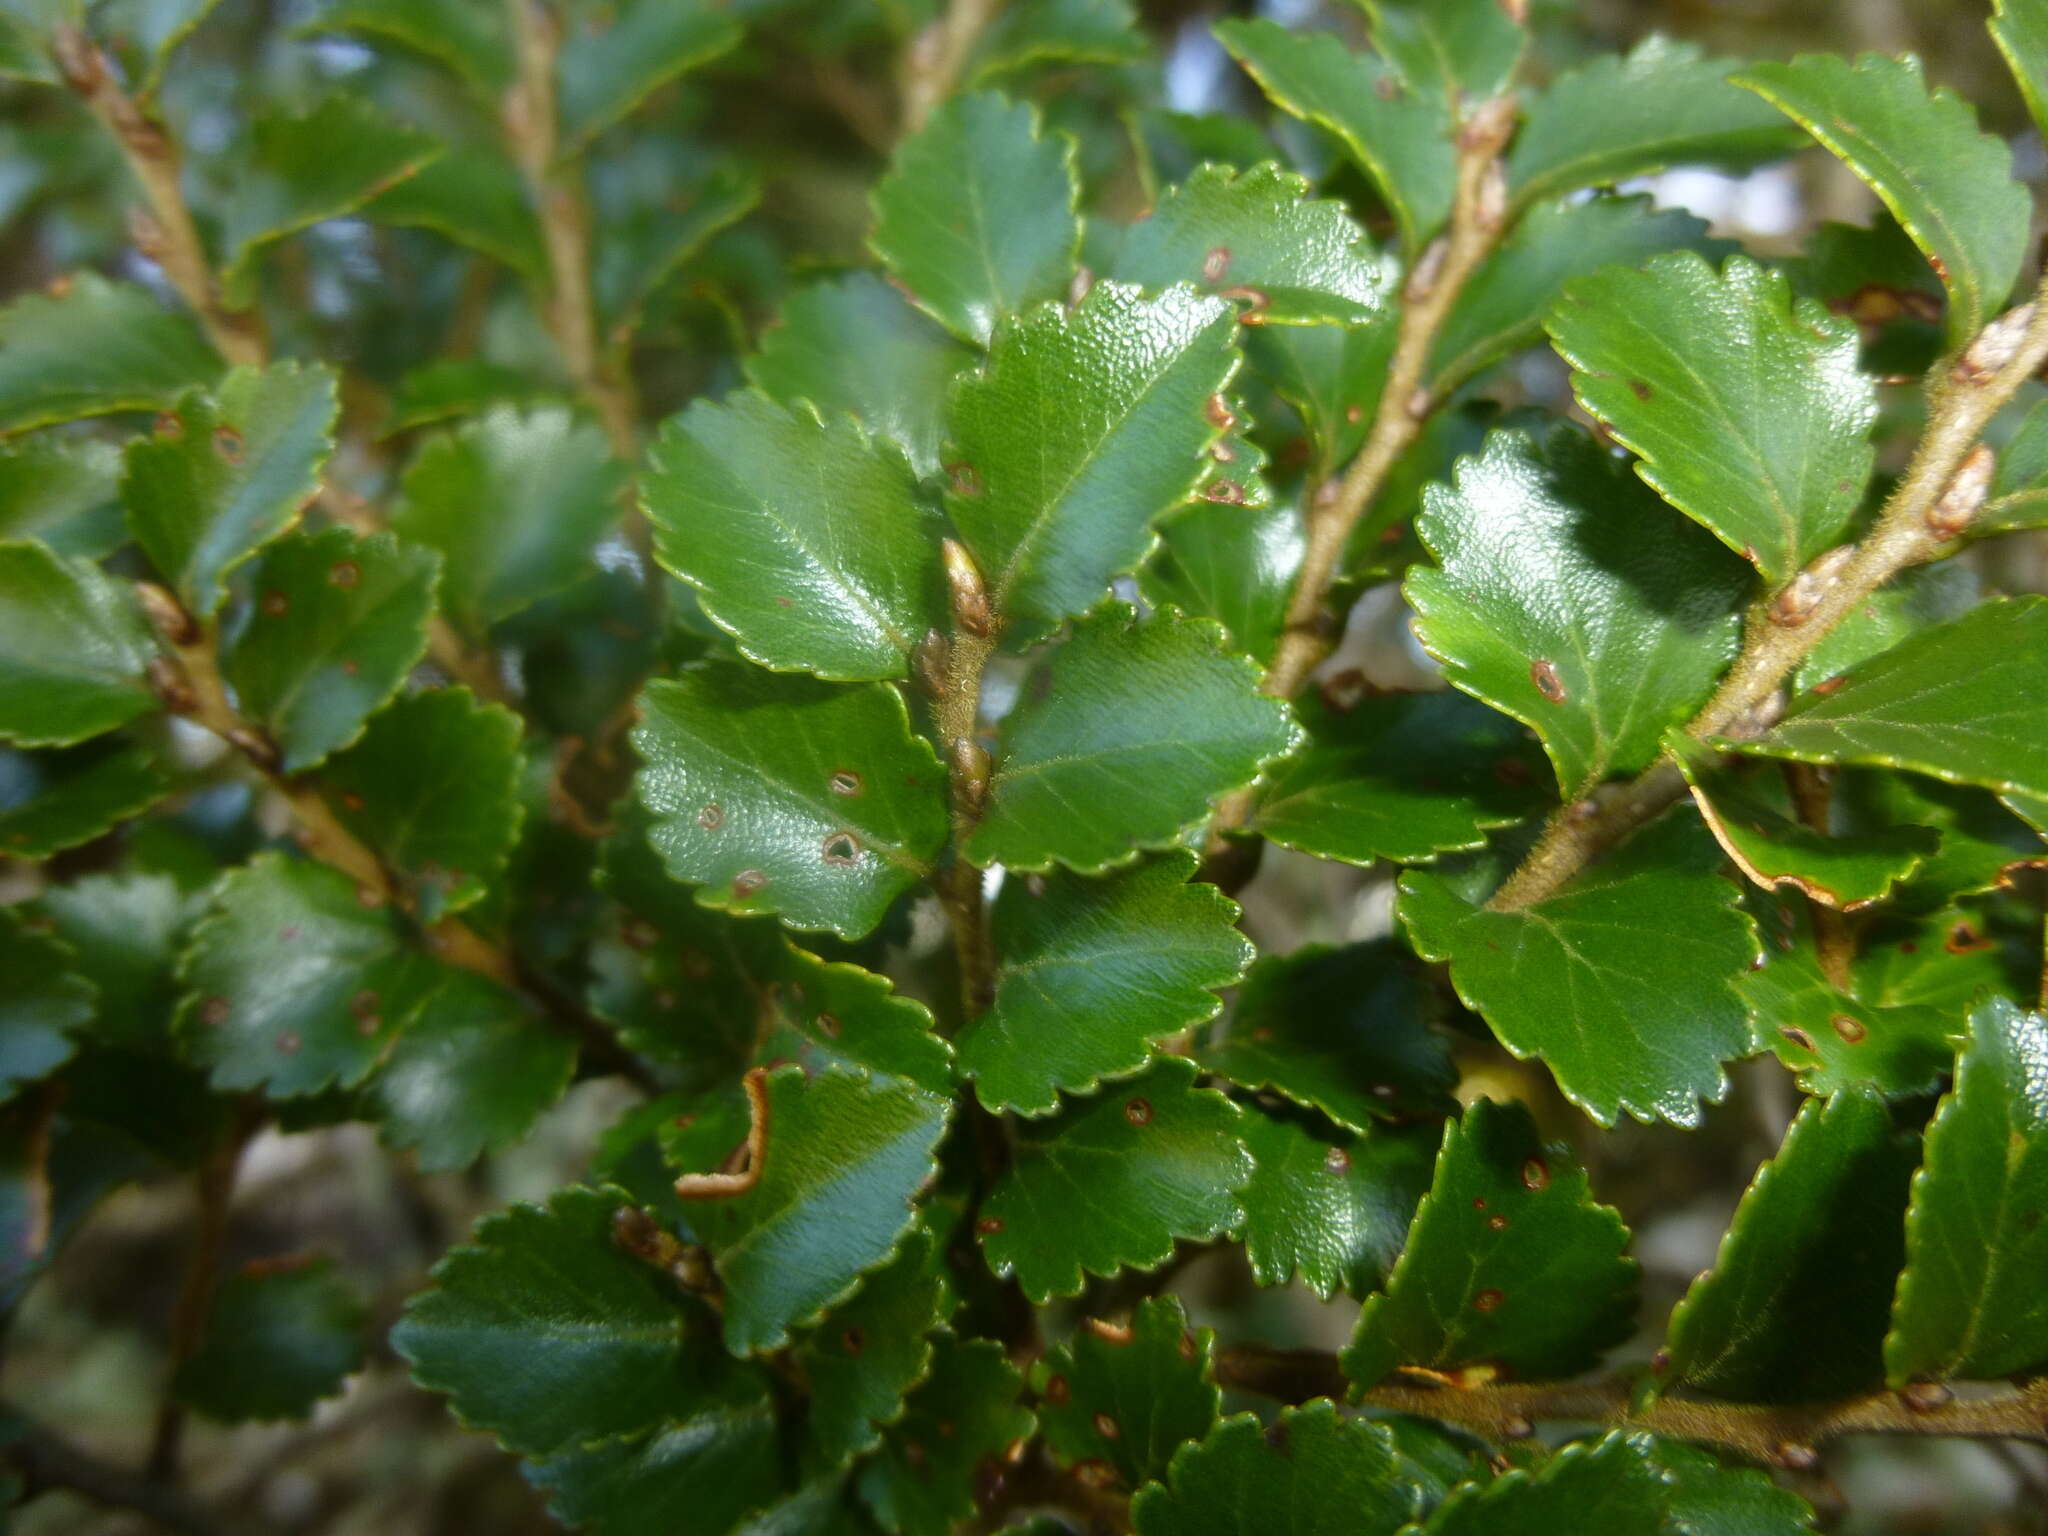 Image of Silver beech